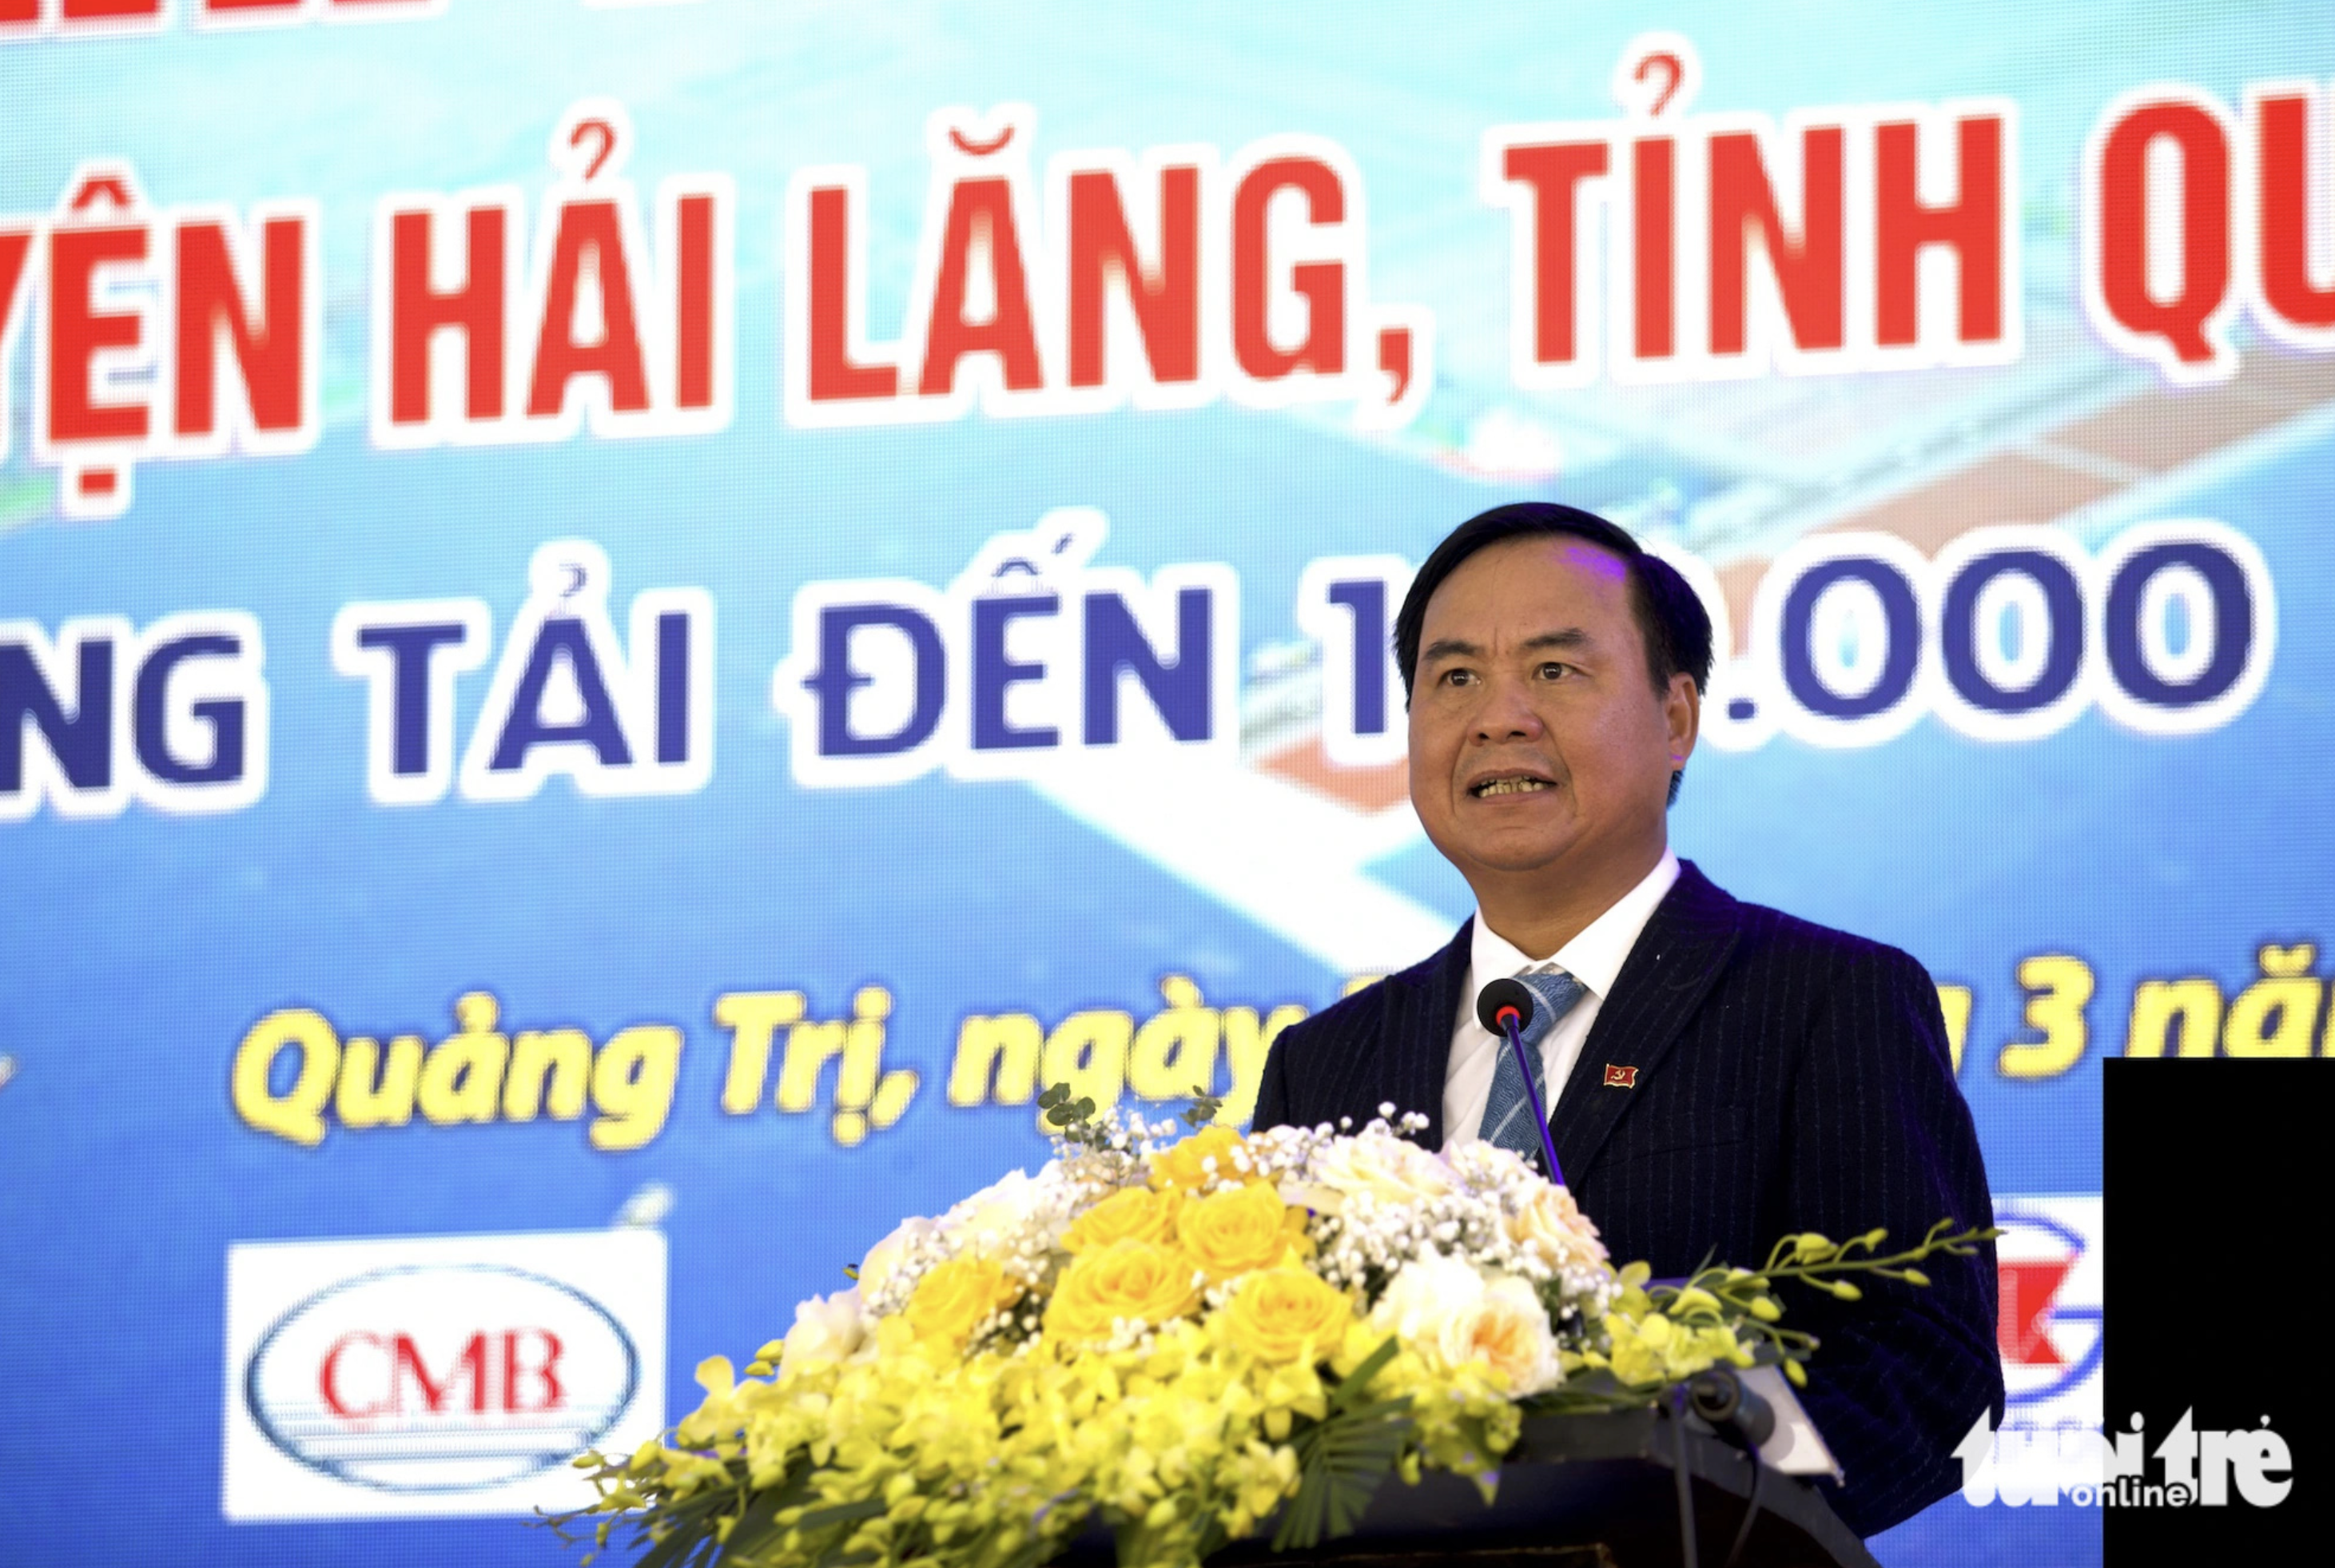 Vo Van Hung, chairman of the Quang Tri Province People’s Committee, spoke at the groundbreaking ceremony for the My Thuy deep-water port project on March 25, 2024. Photo: Hoang Tao / Tuoi Tre